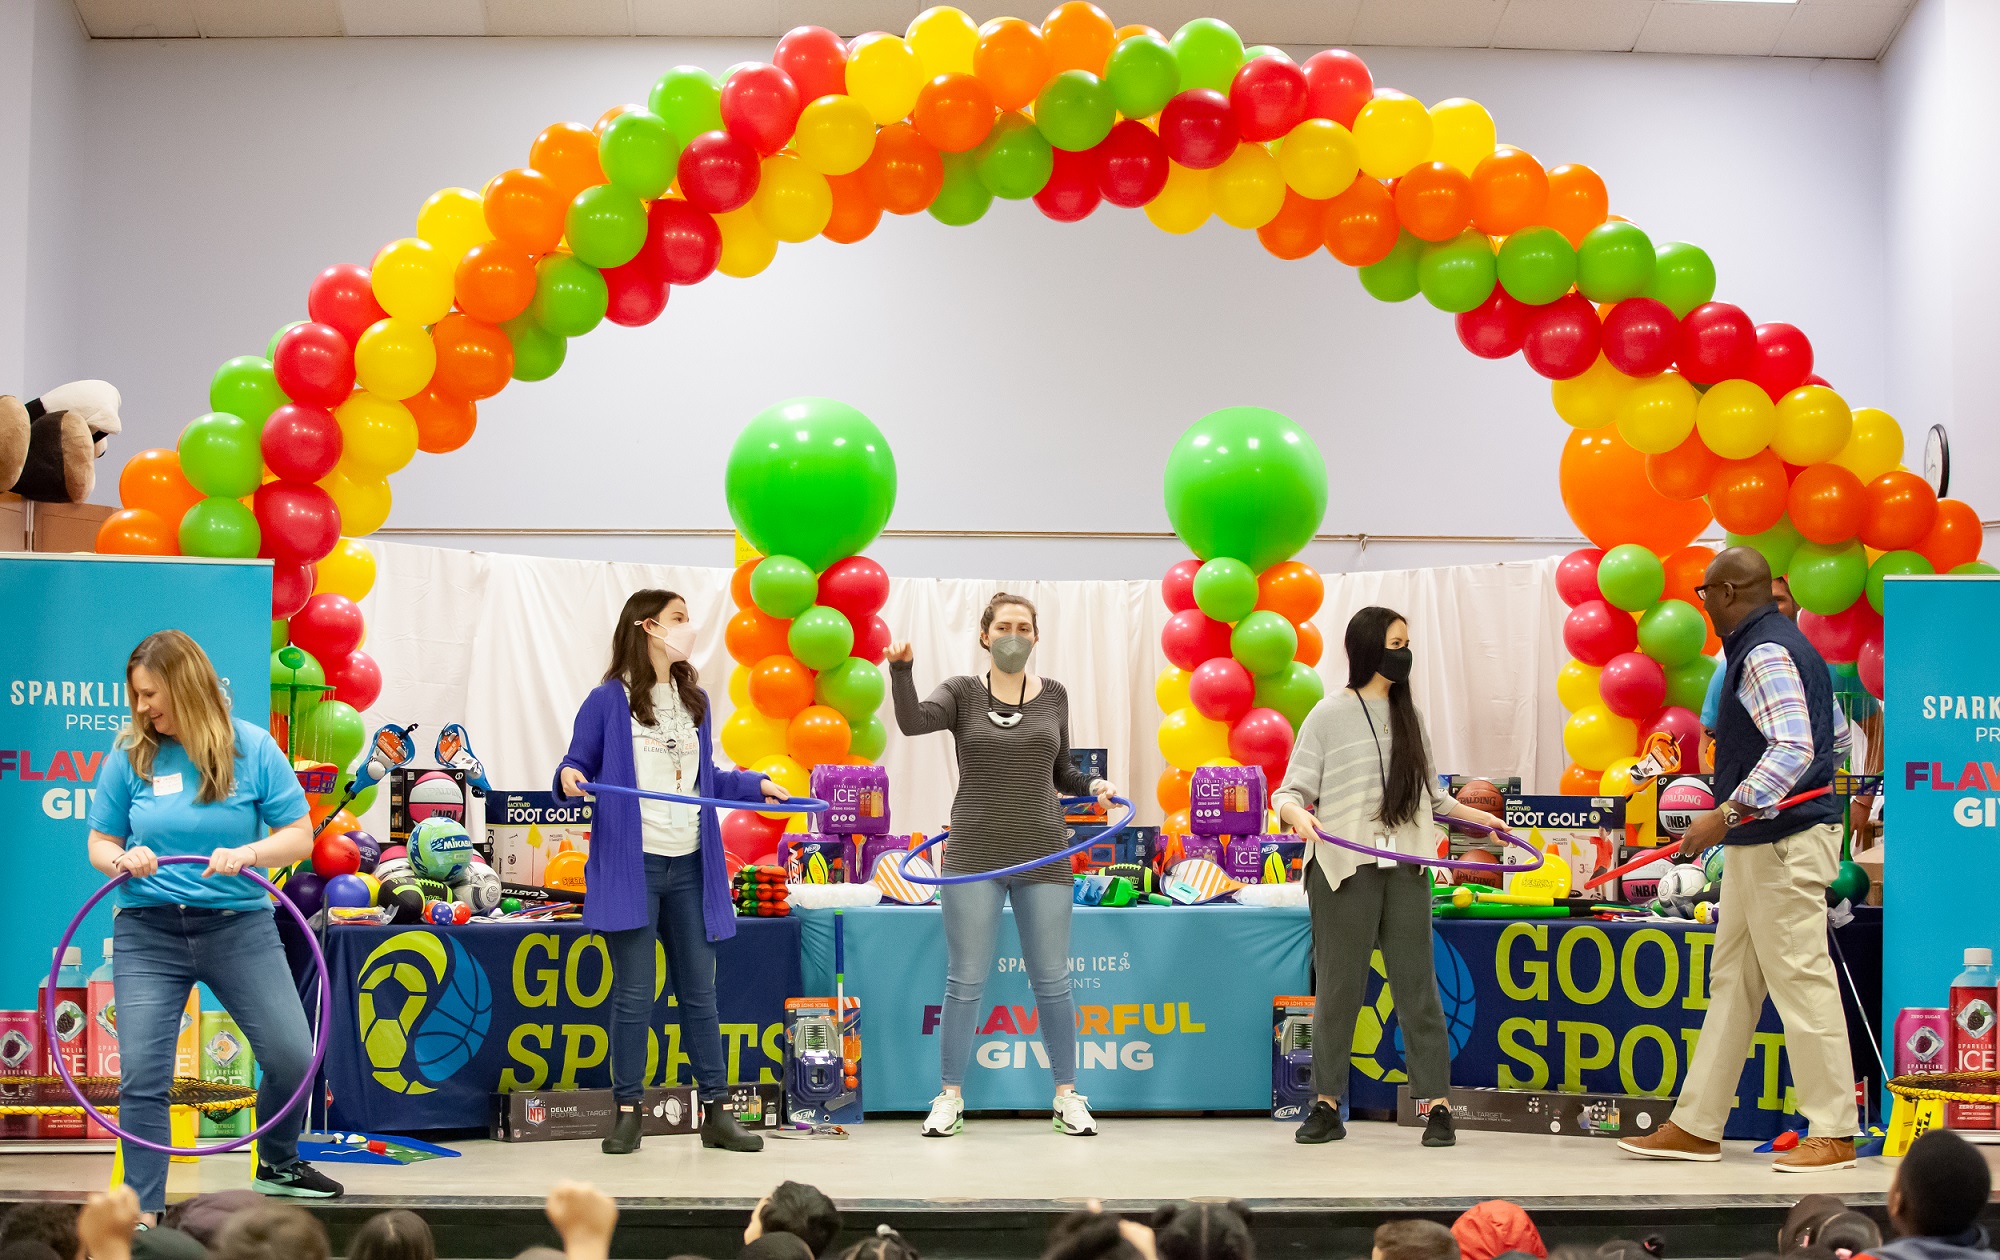 Teachers and volunteers compete in hula hoop contest on stage